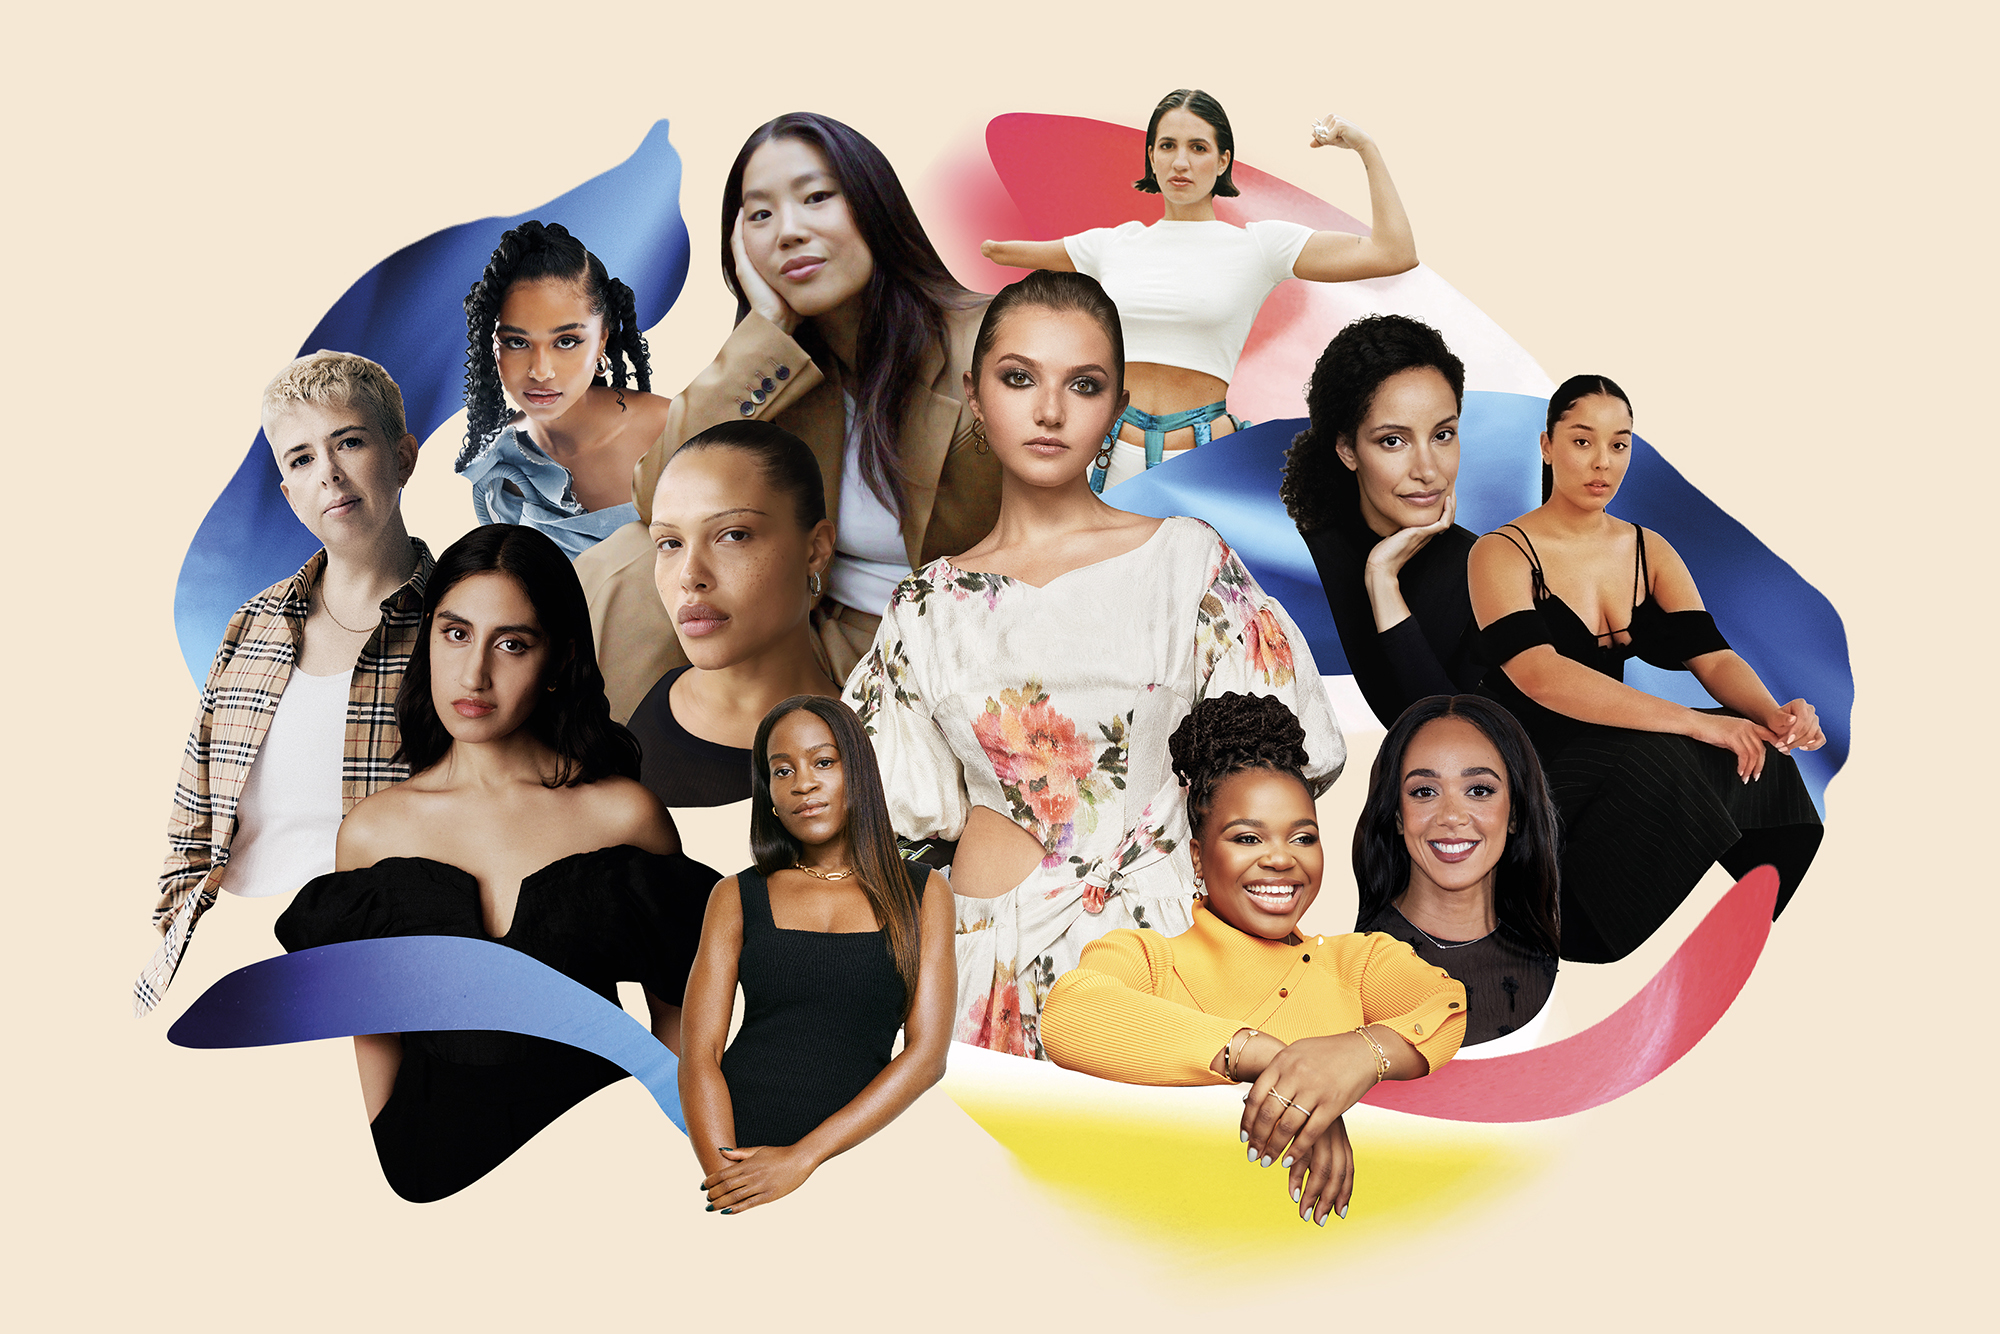 NET-A-PORTER'S 20 Incredible Women On What They Wish They'd Known At 20